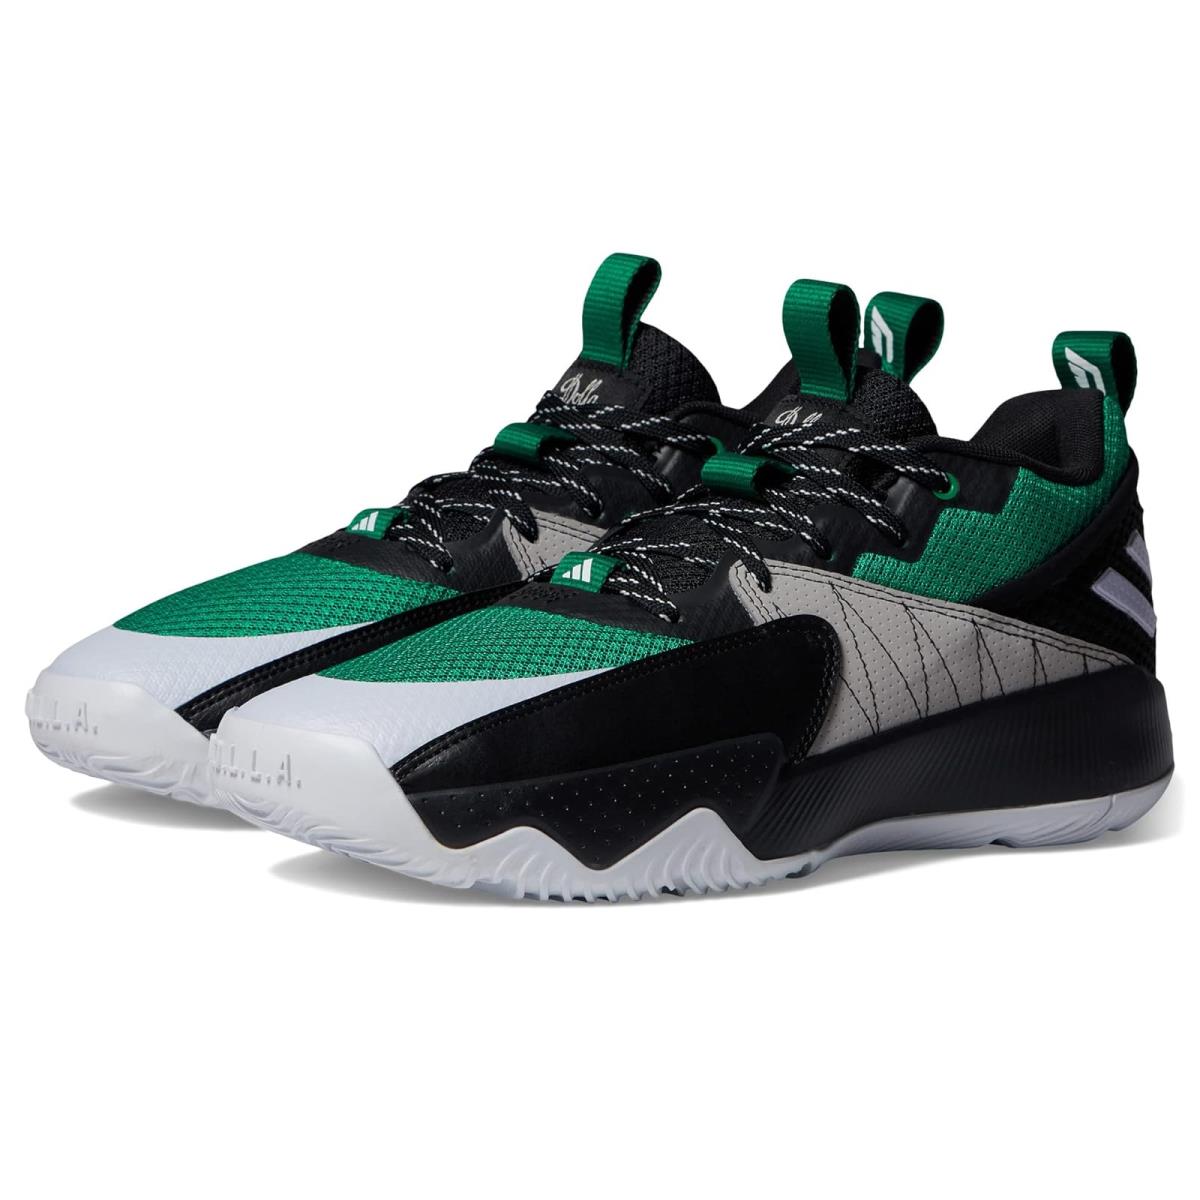 Unisex Sneakers Athletic Shoes Adidas Dame Certified Court Green/Black/White